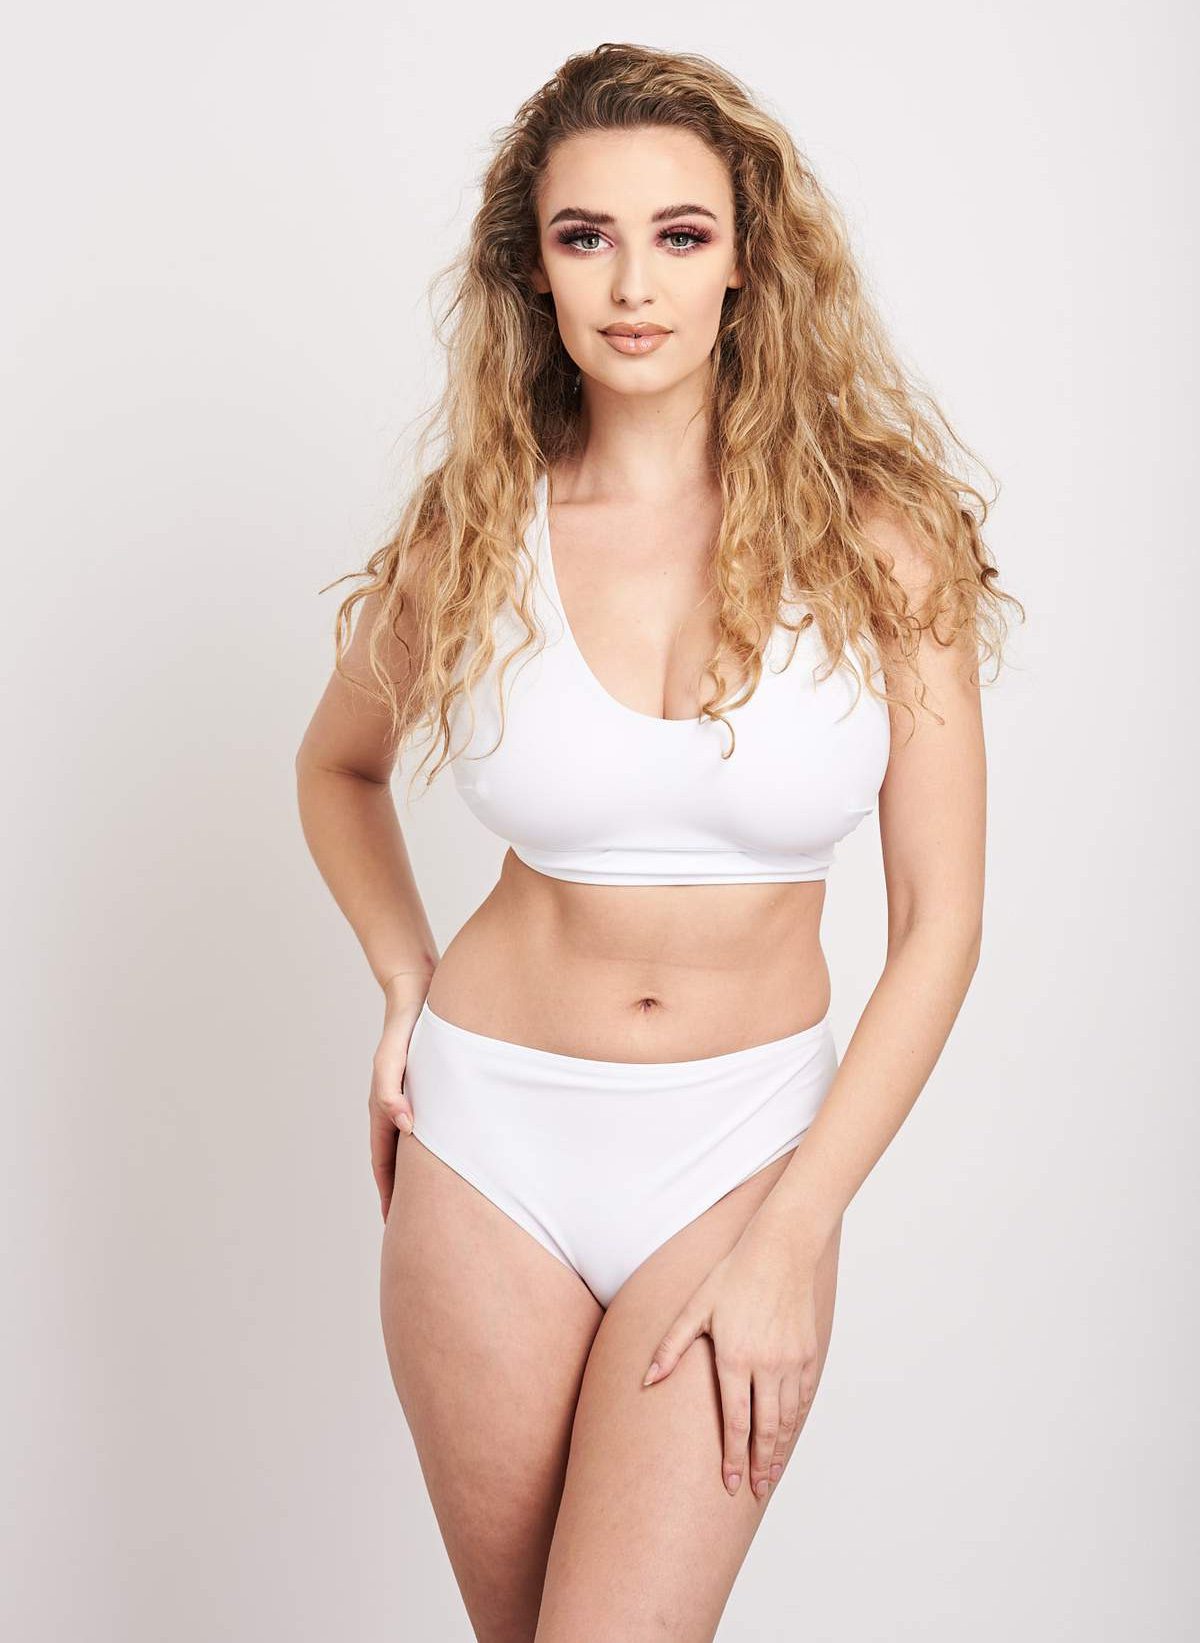 6 New(ish) Full Bust Swimwear Brands Up to a KK Cup